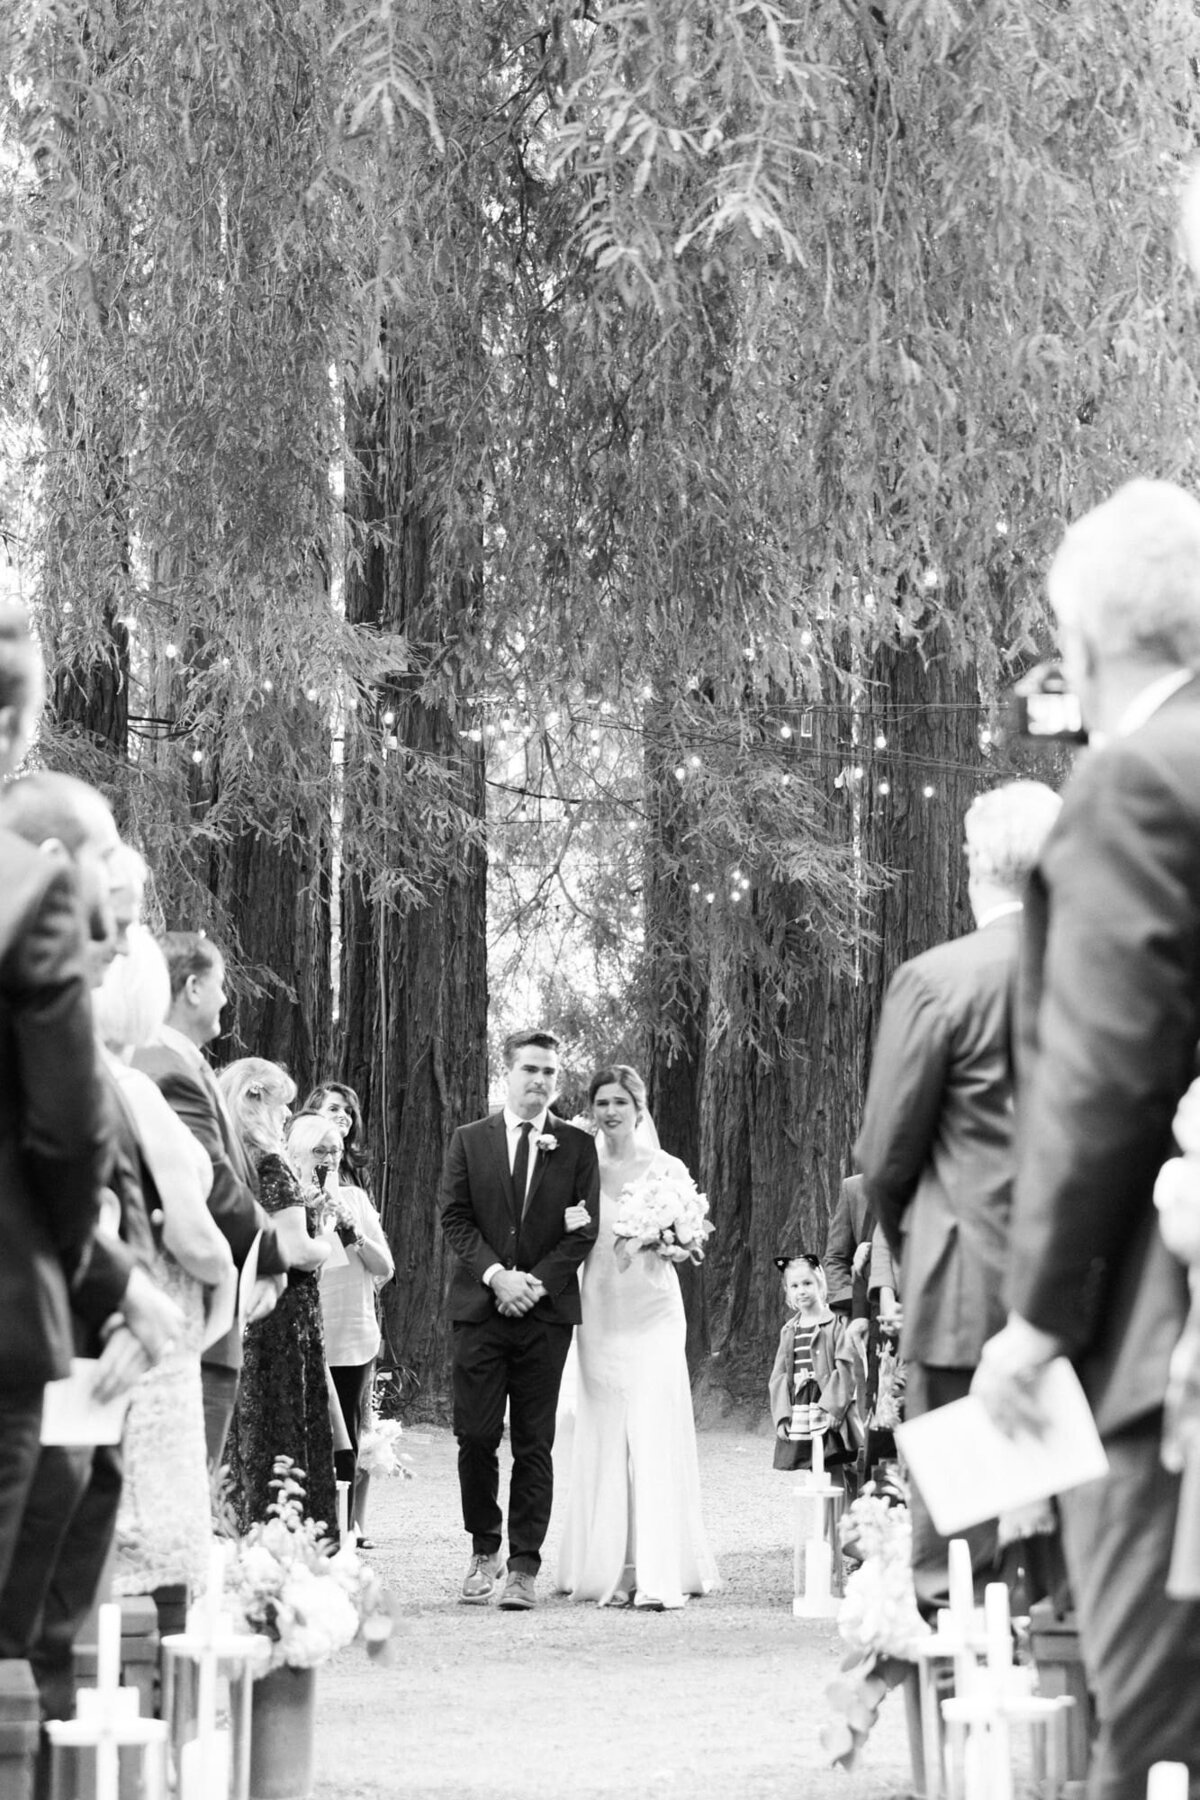 Guests at the wedding ceremony stand in celebration of the marrying couple walking down the aisle. Forest wedding photography in Washington by Robin Jolin.